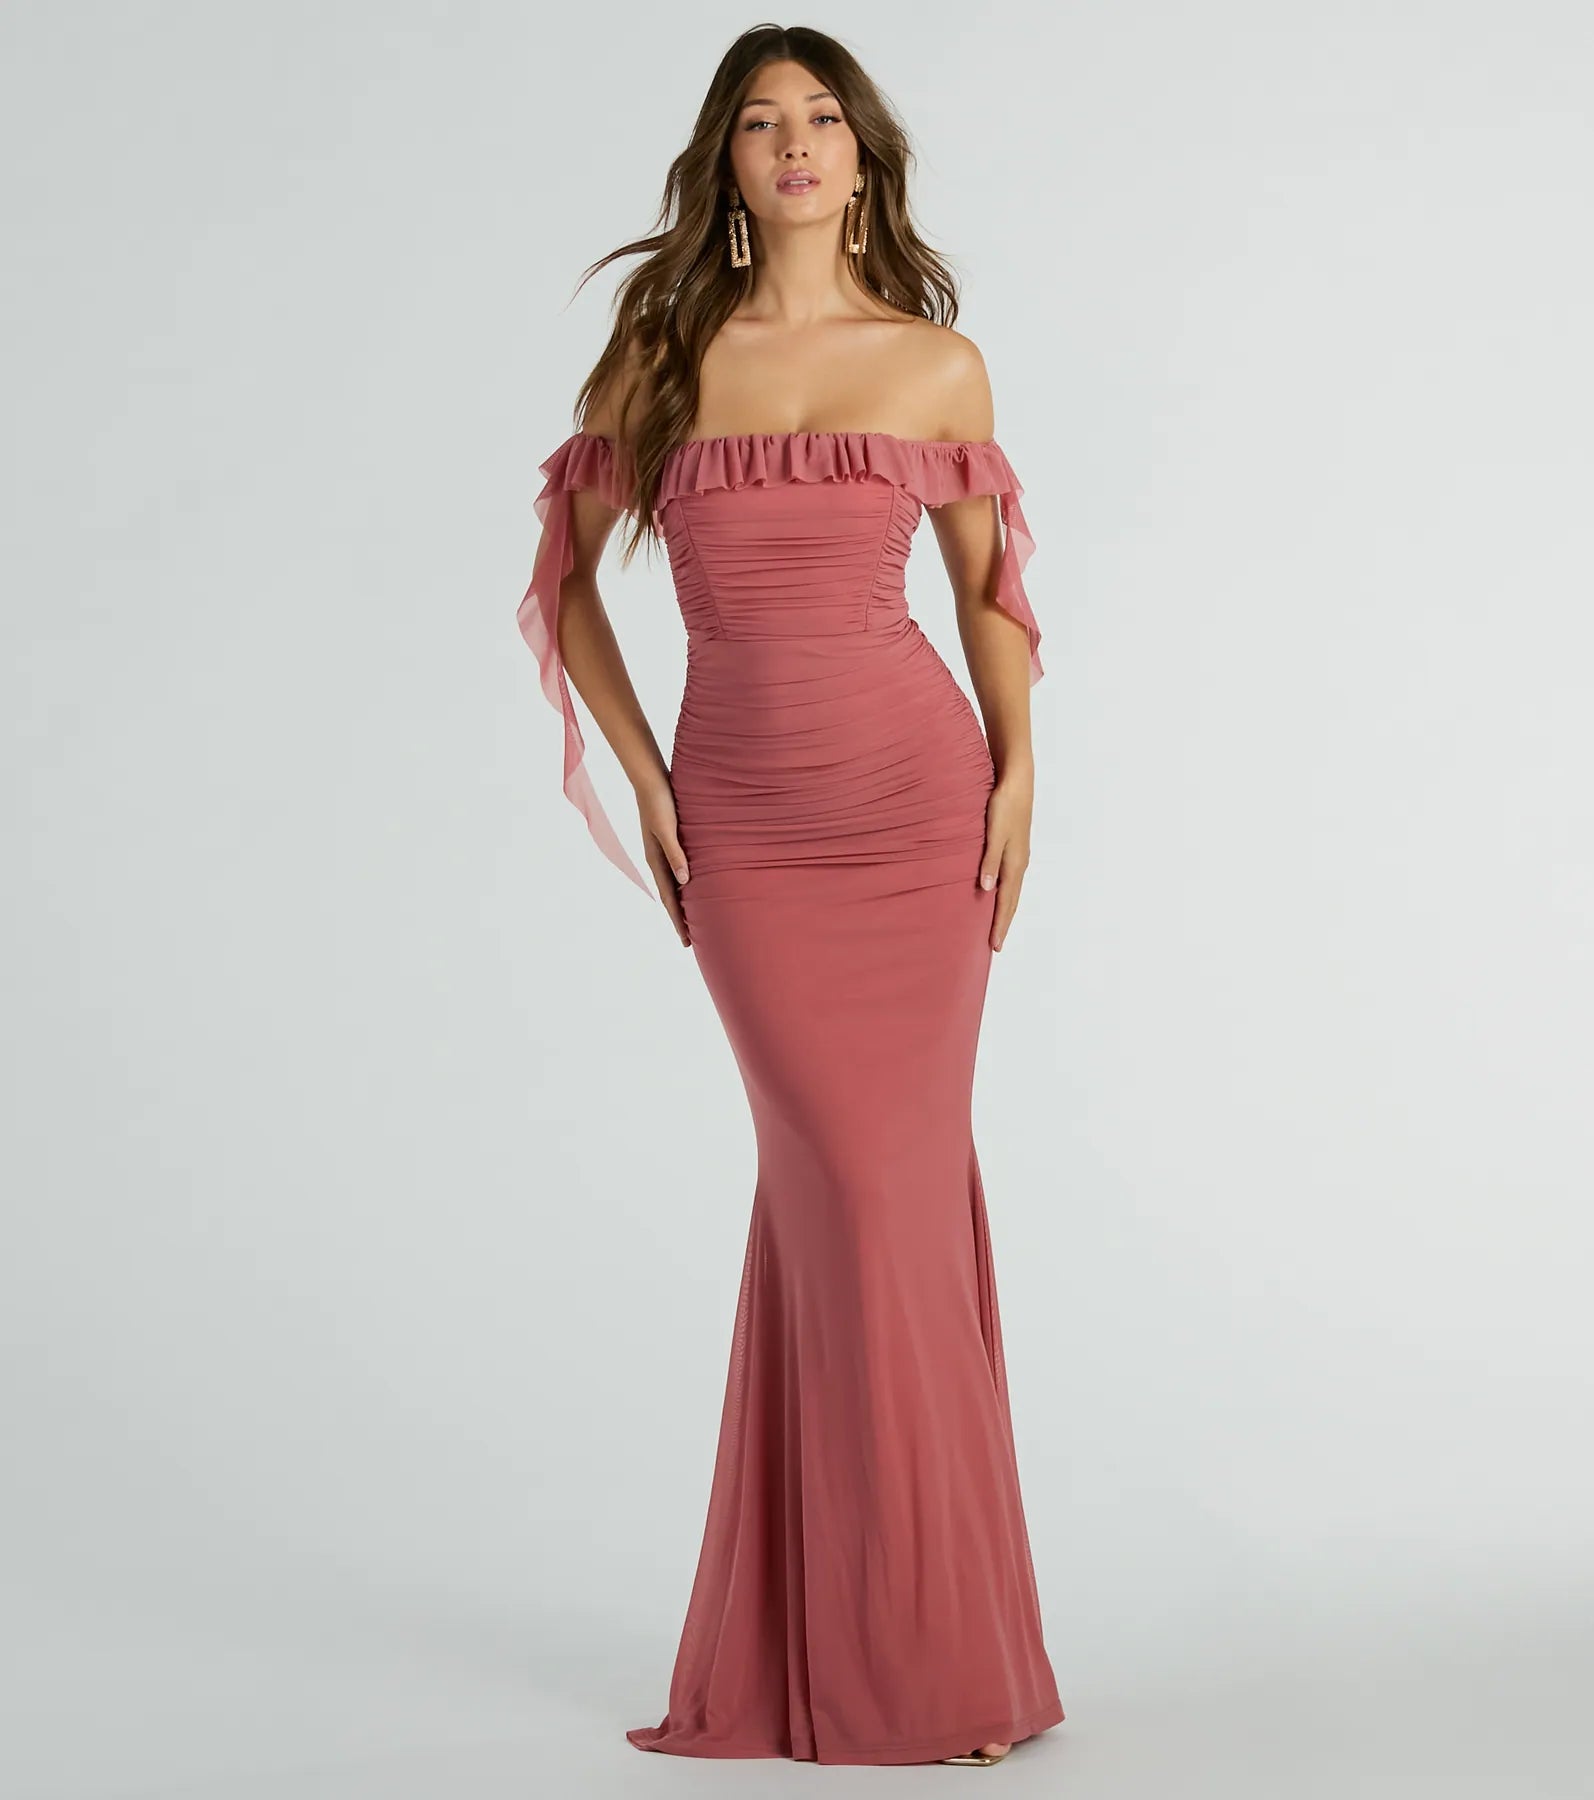 Sexy Sophisticated Mermaid Knit Off the Shoulder Ruched Mesh Stretchy Maxi Dress With Ruffles